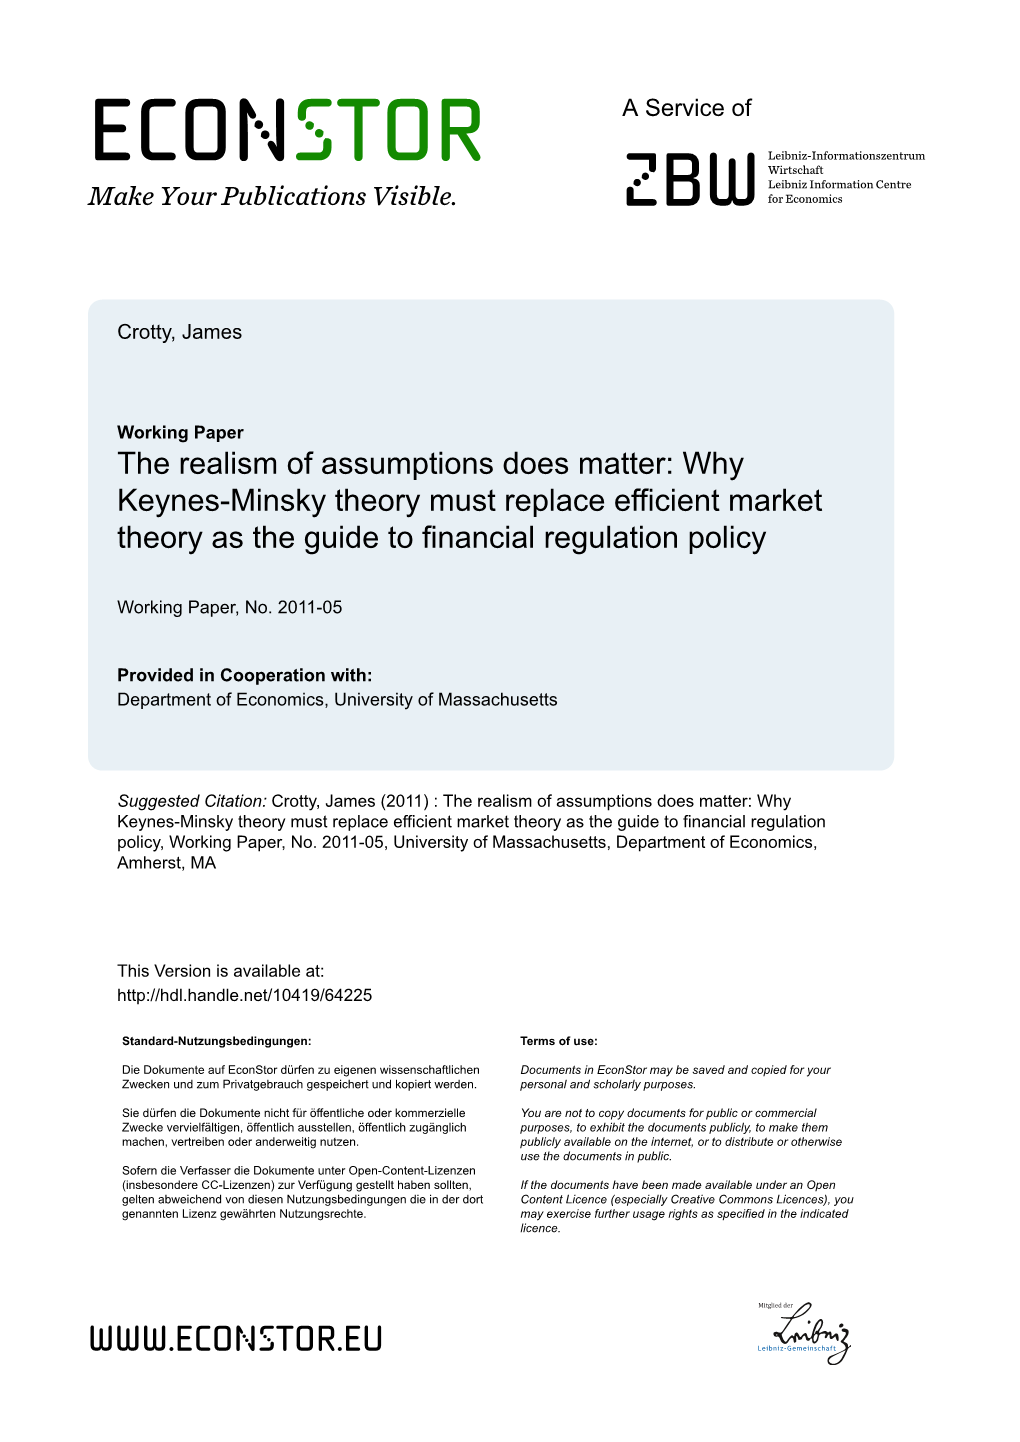 Why Keynes-Minsky Theory Must Replace Efficient Market Theory As the Guide to Financial Regulation Policy